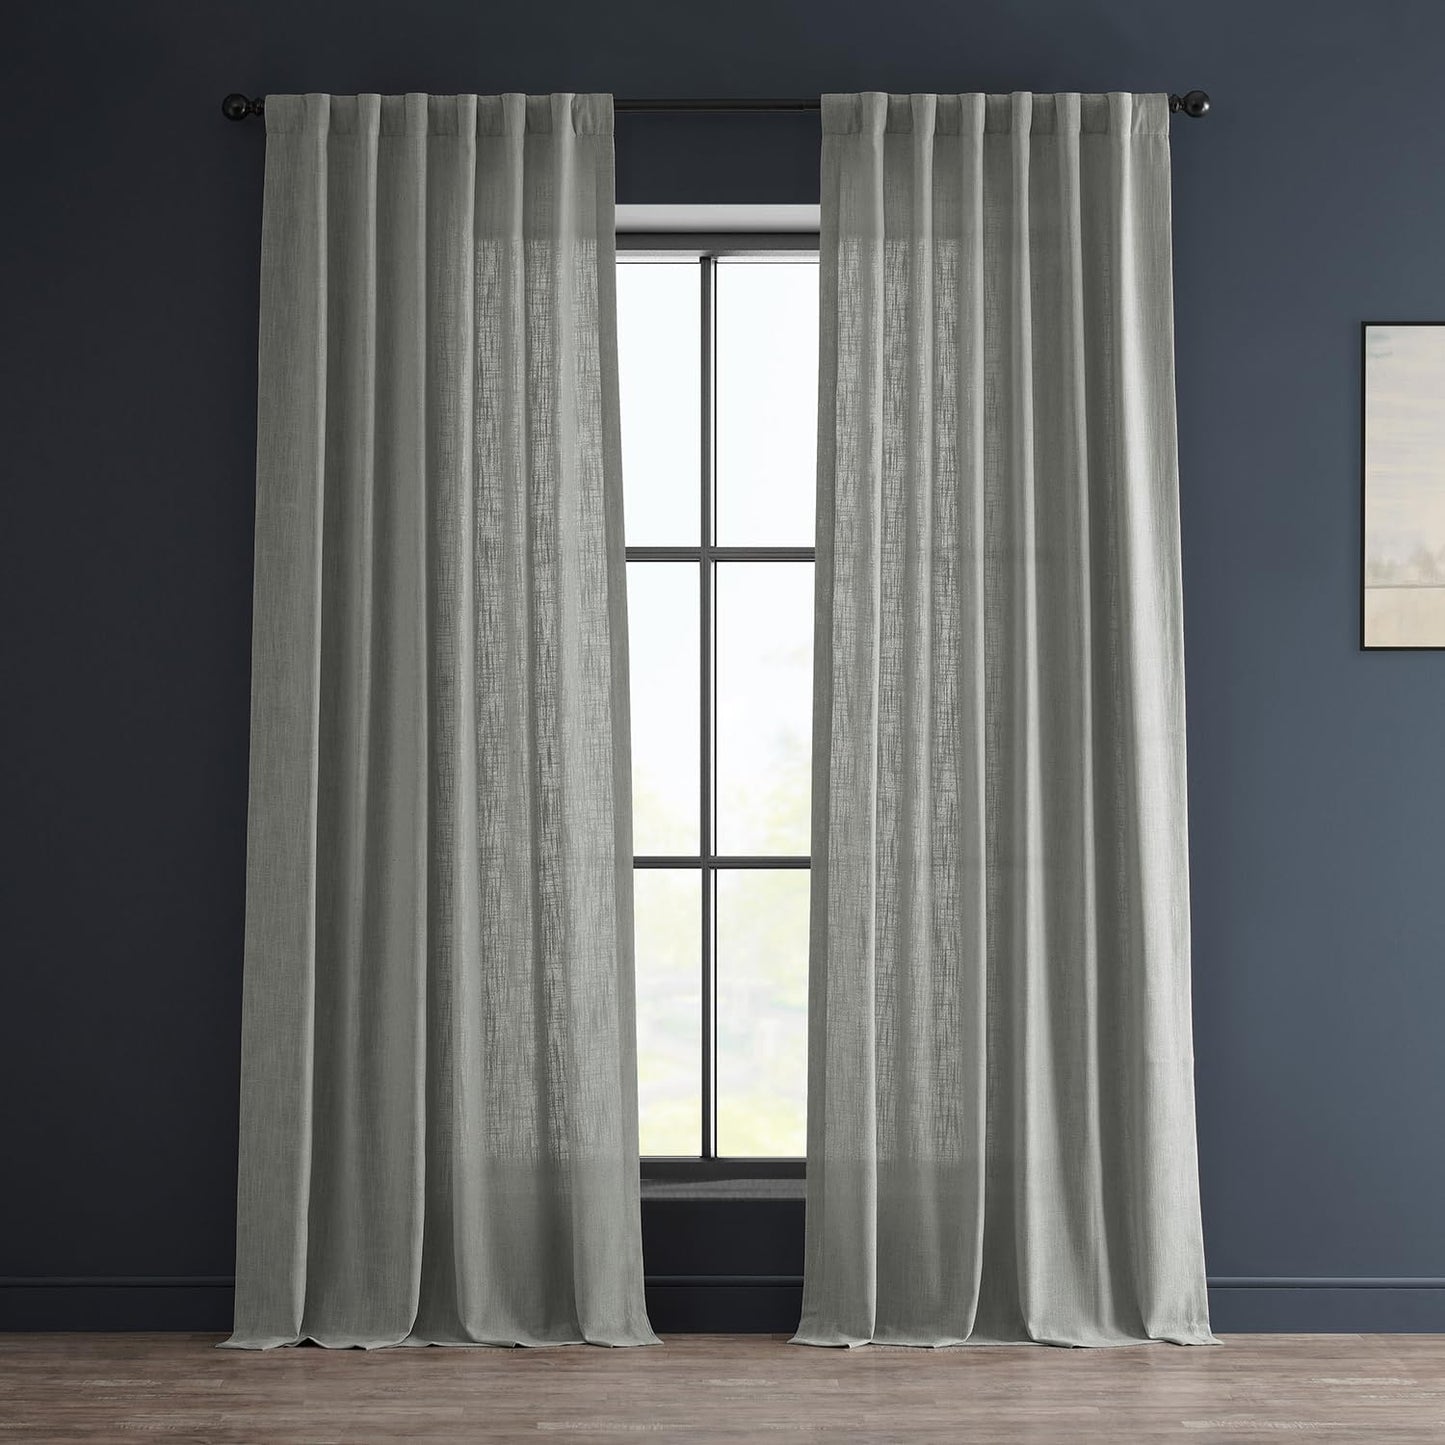 HPD Half Price Drapes Semi Sheer Faux Linen Curtains for Bedroom 96 Inches Long Light Filtering Living Room Window Curtain (1 Panel), 50W X 96L, Rice White  EFF Ash Grey 50W X 120L 